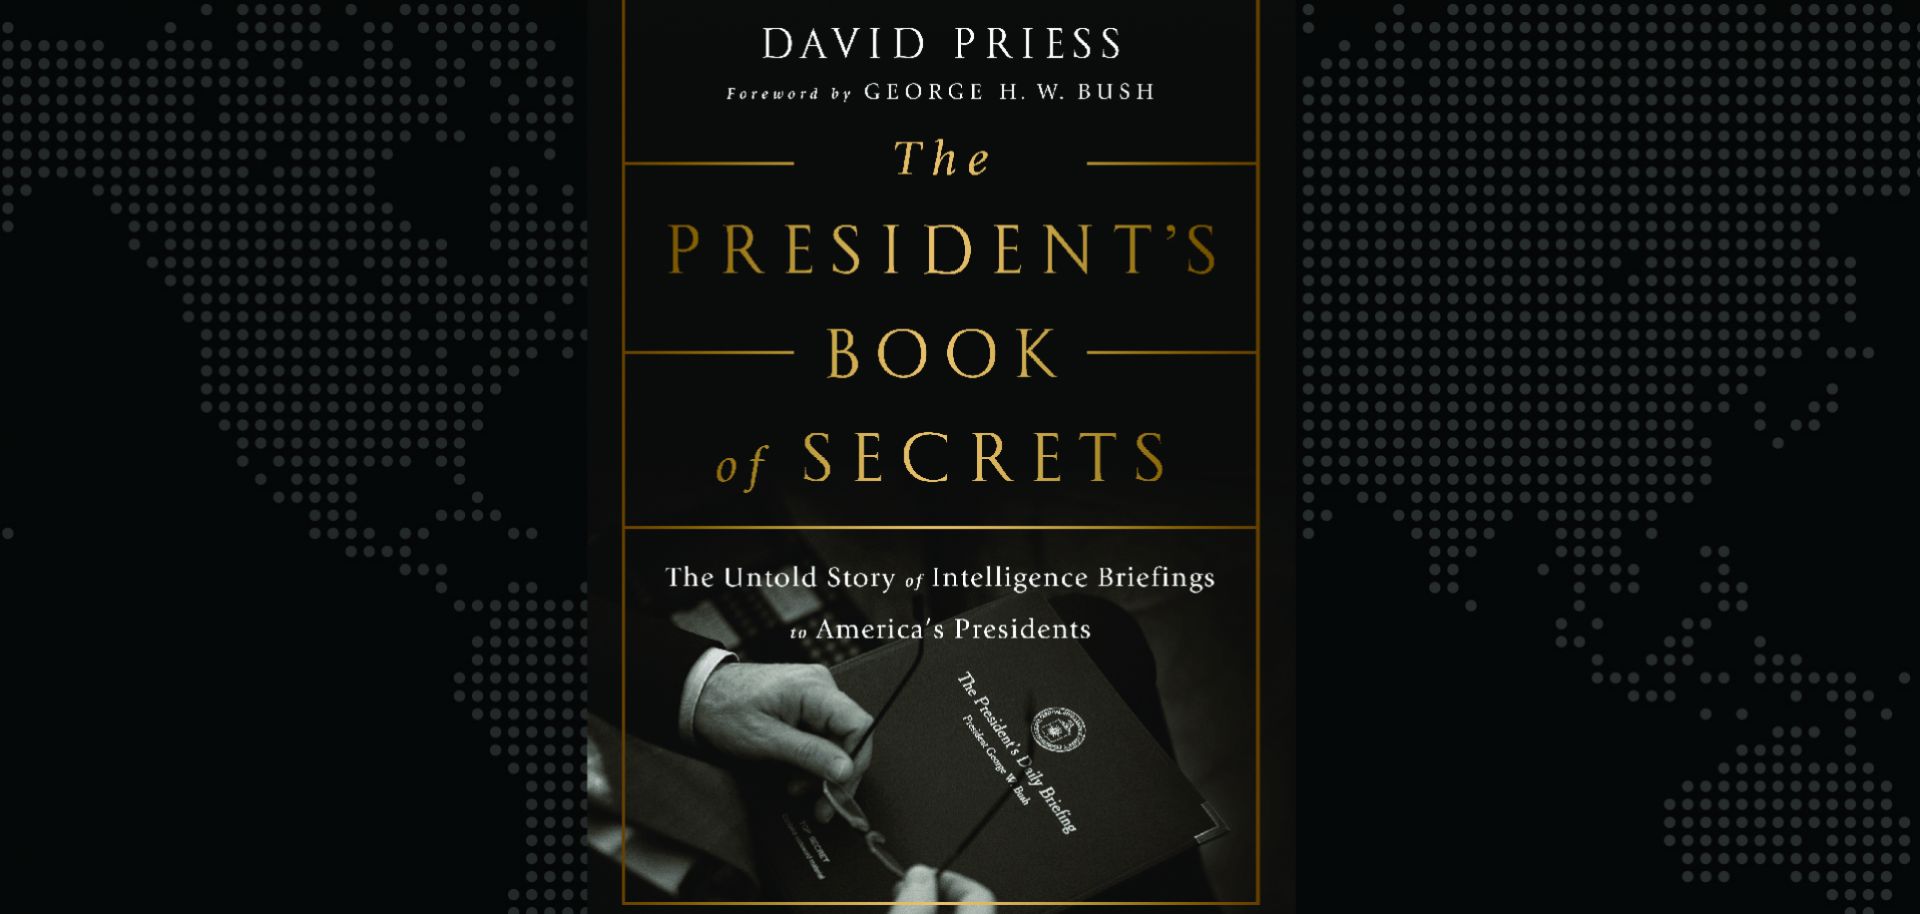 graphic The President's Book of Secrets by David Priess